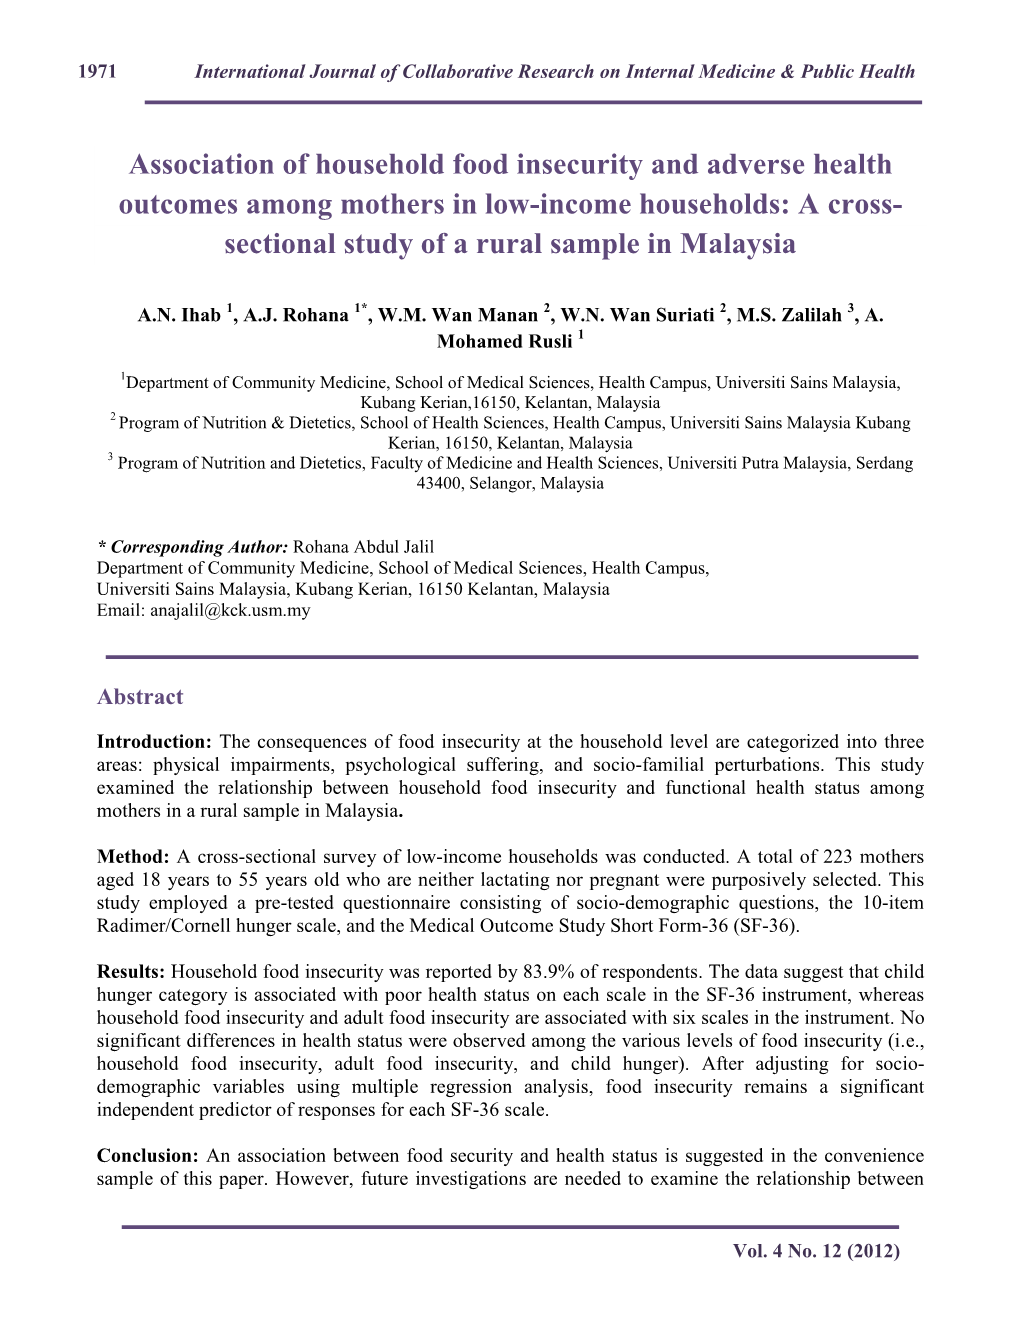 Association of Household Food Insecurity and Adverse Health Outcomes Among Mothers in Low�Income Households: a Cross� Sectional Study of a Rural Sample in Malaysia